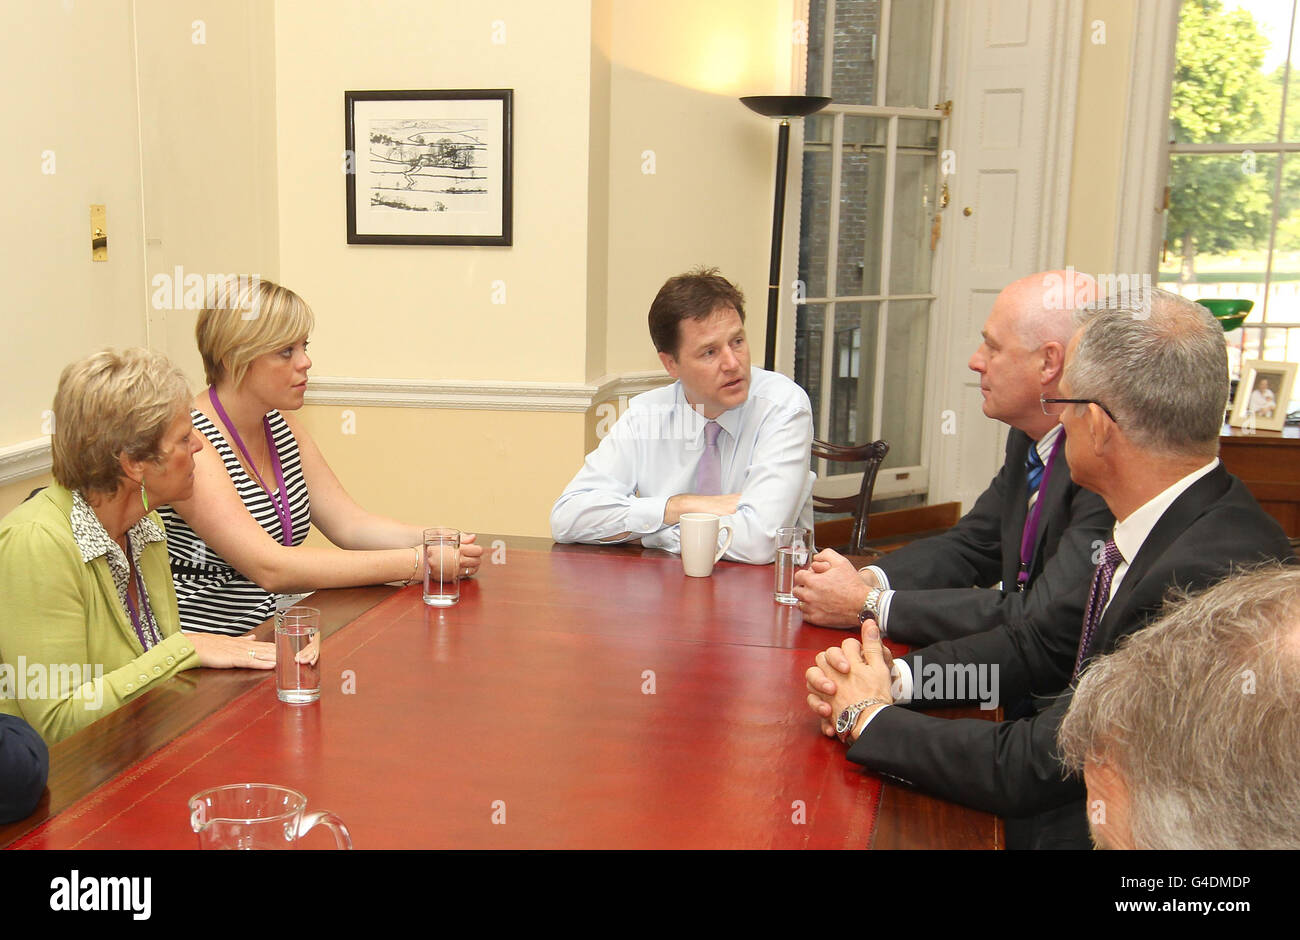 Deputy Prime Minister Nick Clegg (centre) meets with members of the 'Hacked Off' group, (from left to right) Sally Dowler, Gemma Dowler, Bob Dowler and Brian Paddick at the Cabinet Office in Westminster, London, for a meeting with Deputy Prime Minister Nick Clegg. Stock Photo